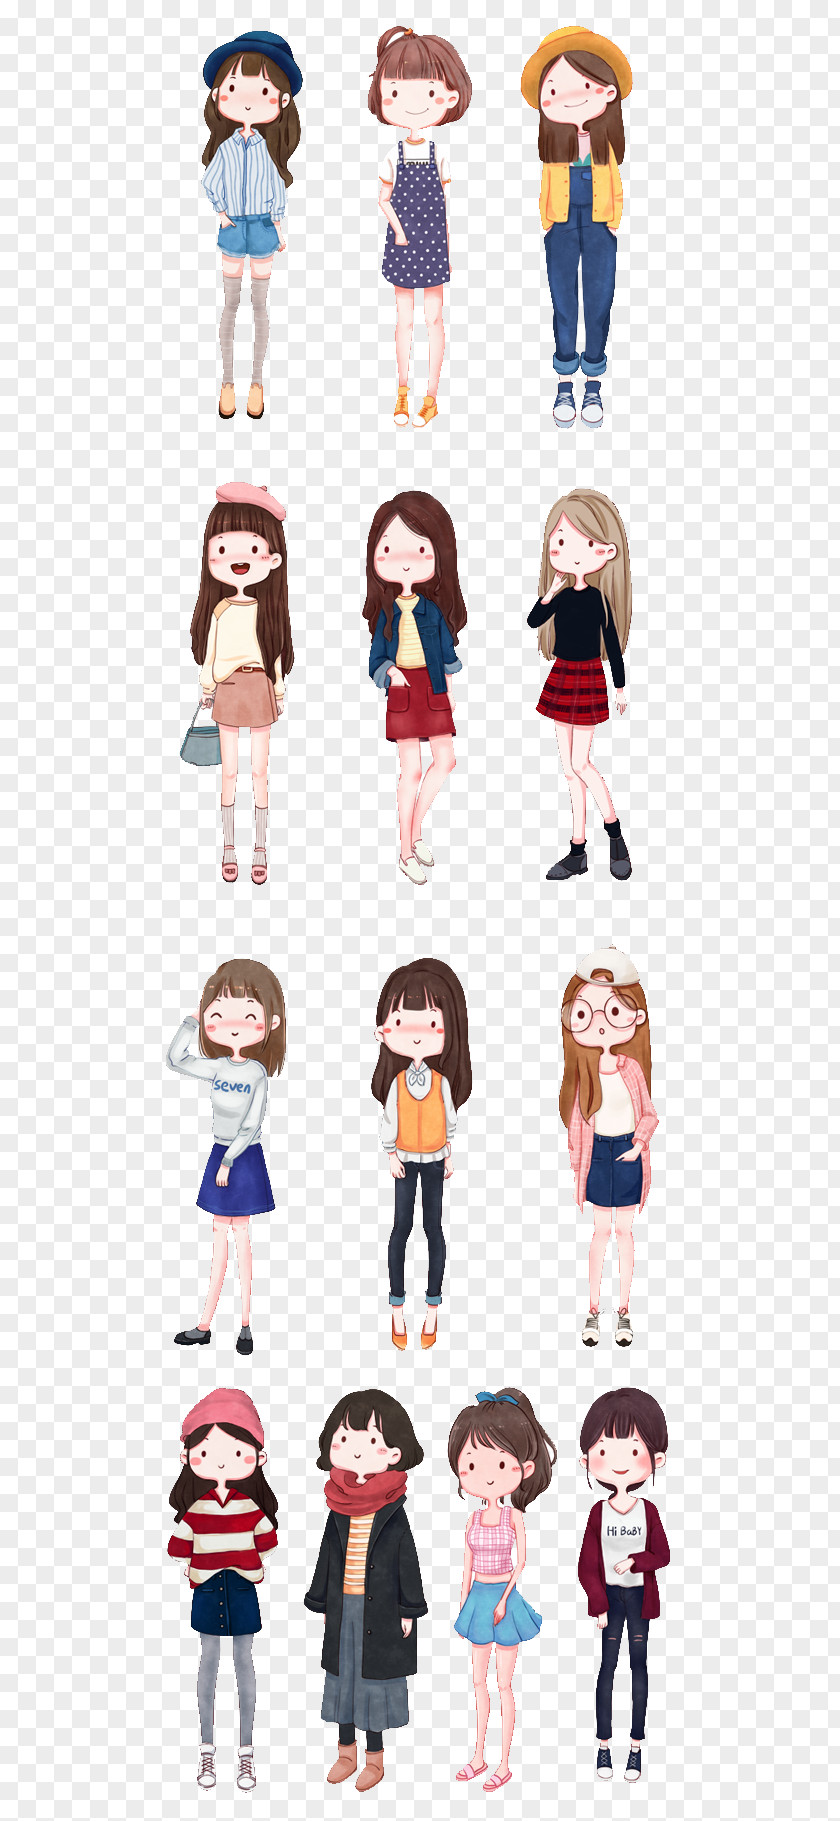 Girl Cartoon Illustration PNG Illustration, Cute cartoon hand painted girl collection, fashion illustration clipart PNG